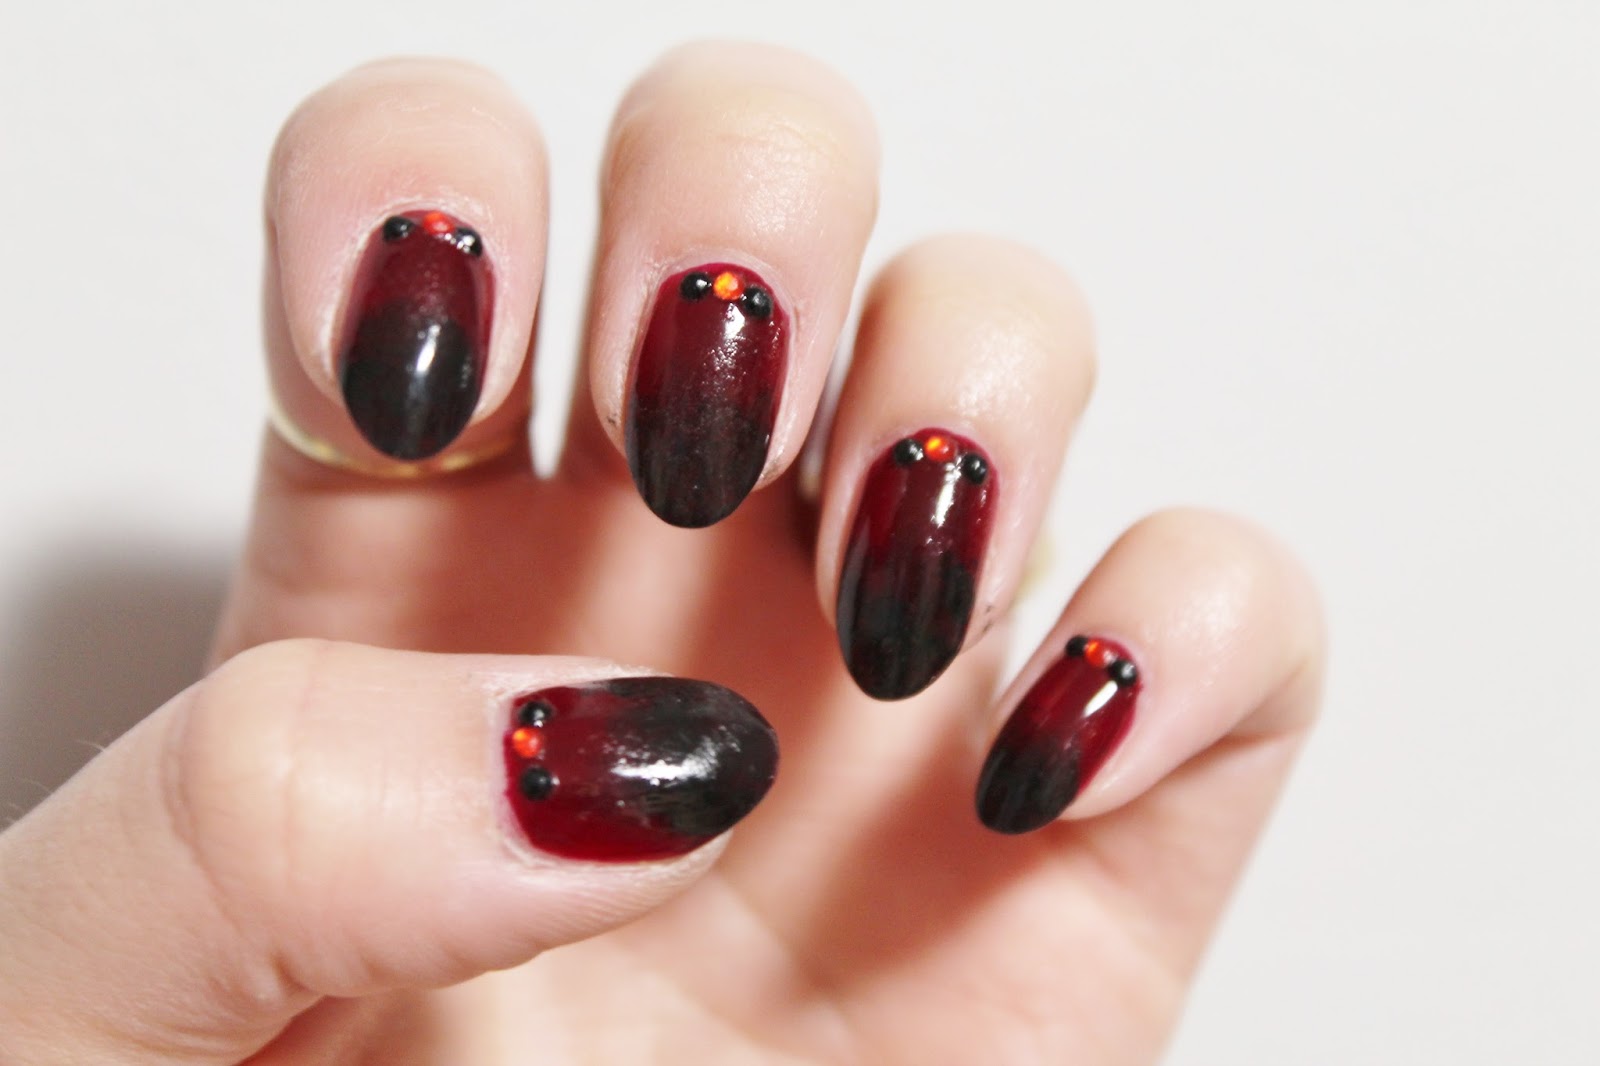 1. Black and Red Ombre Nails - wide 3